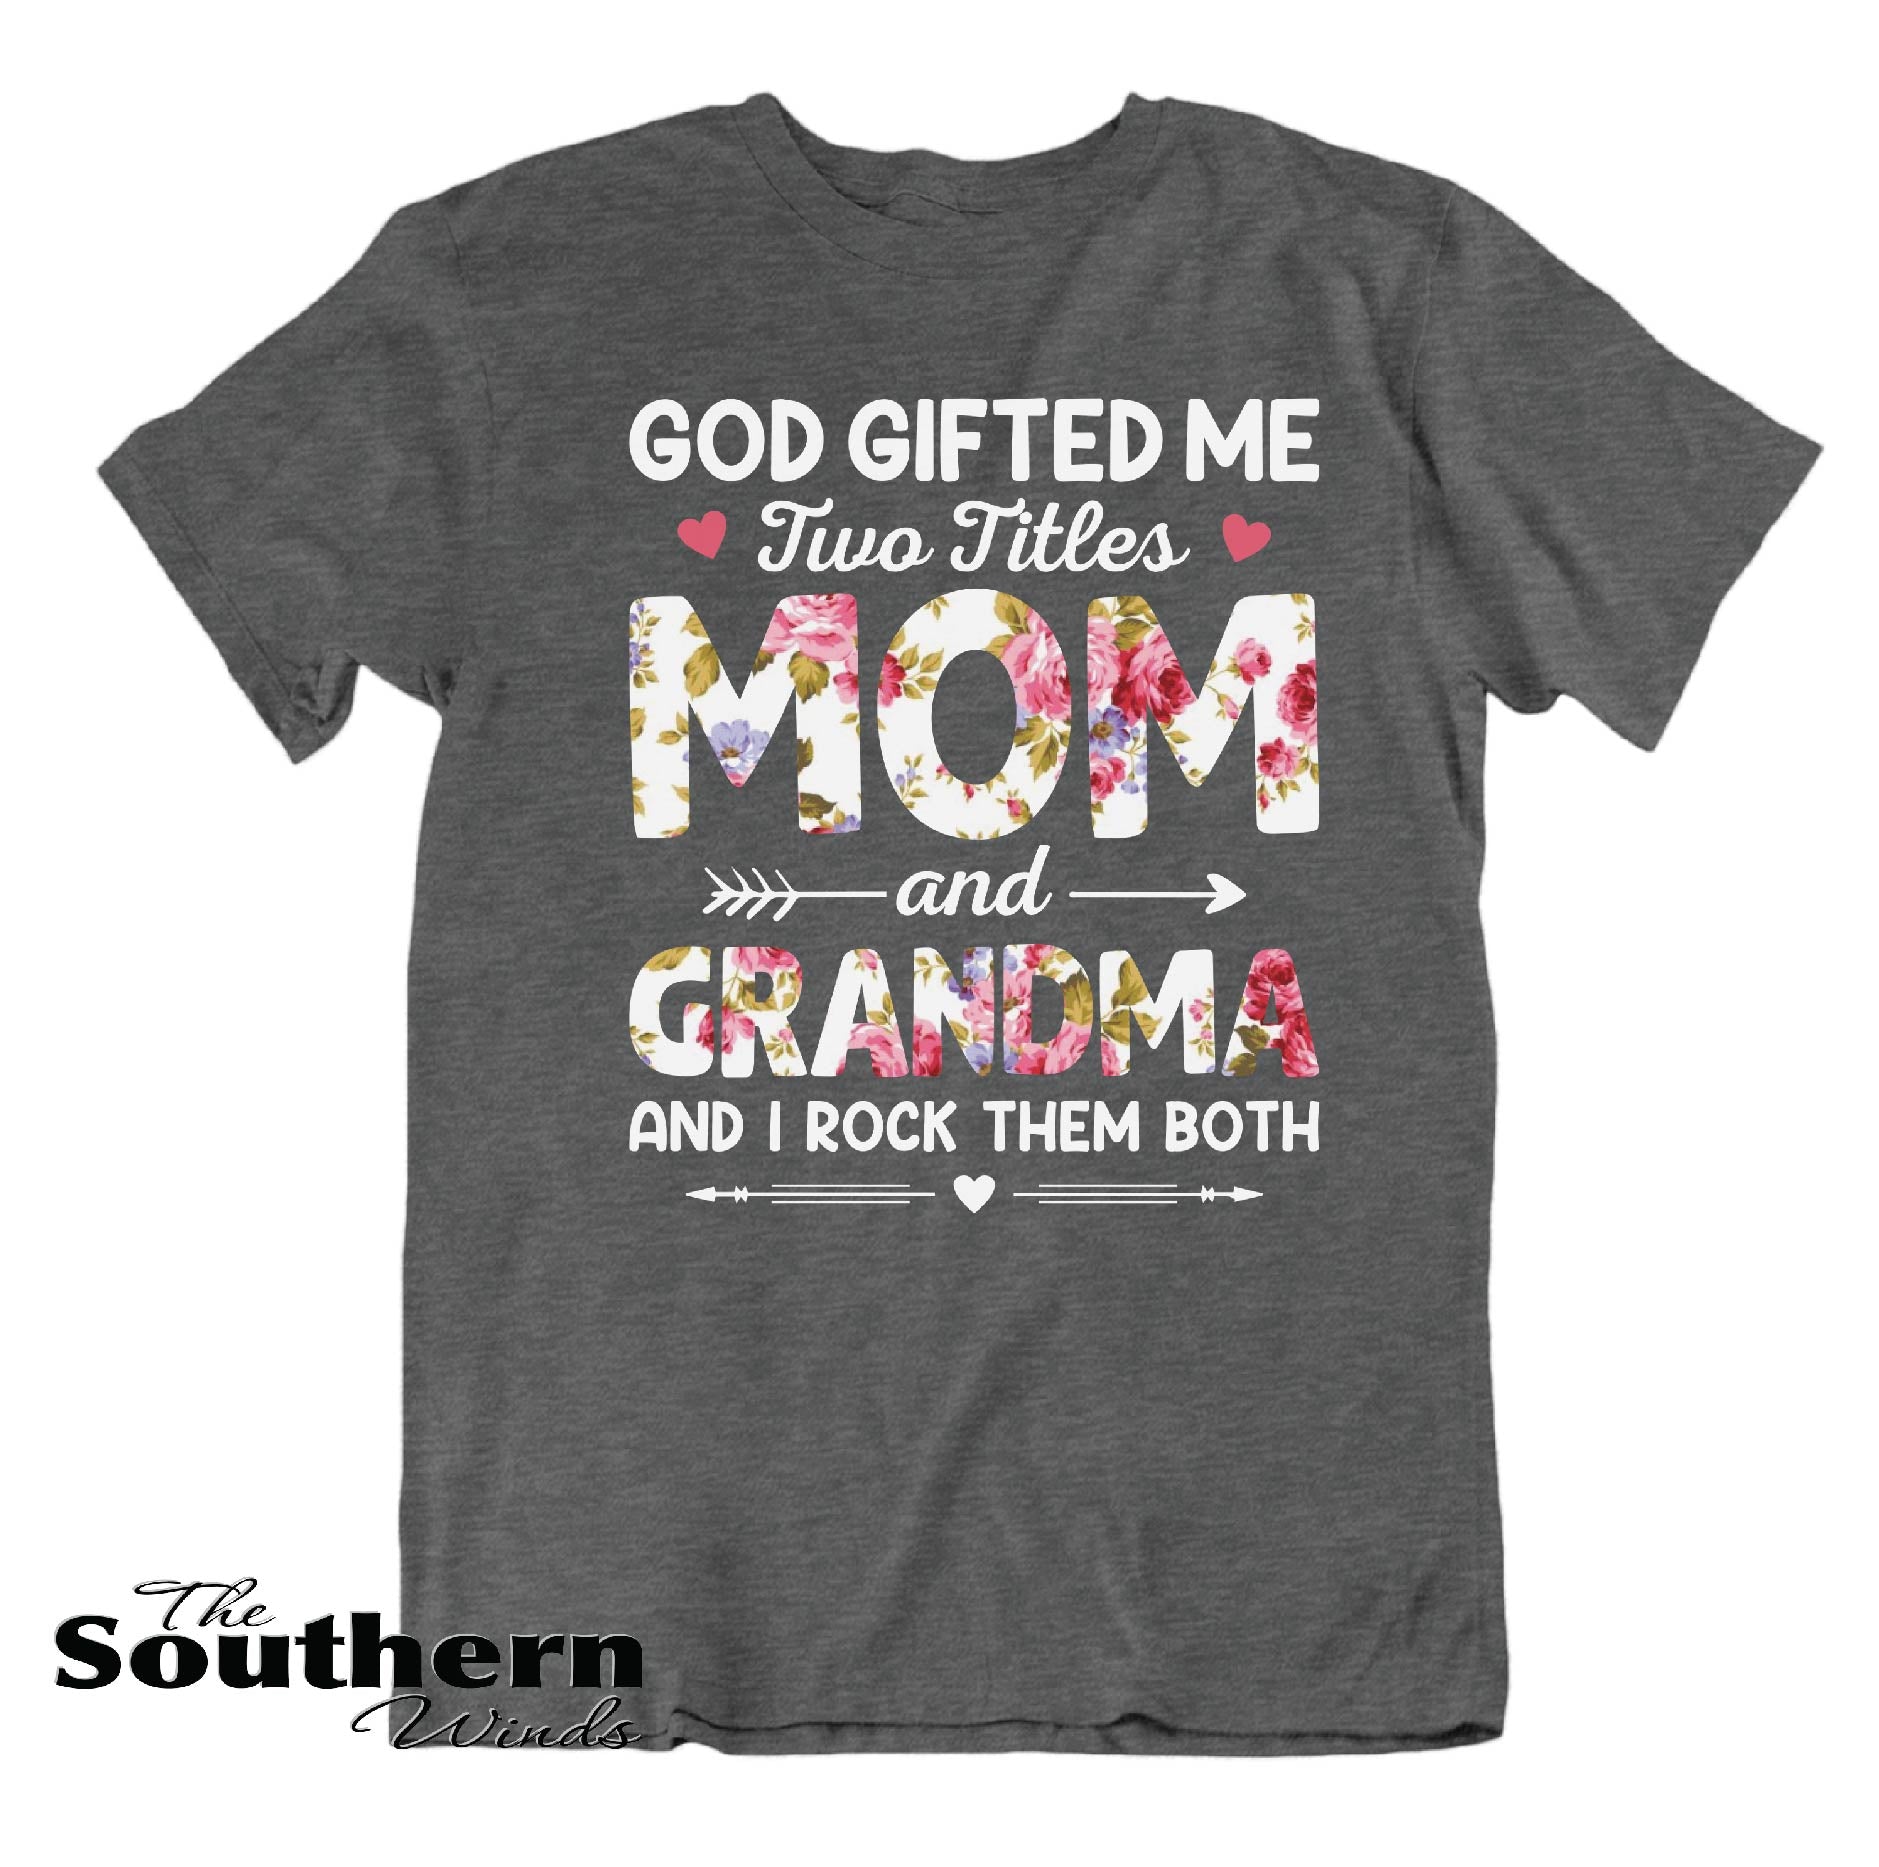 A I Have Two Titles Mom and Grandma - Personalized All-Over Printed T-Shirt, 3XL - Pawfect House